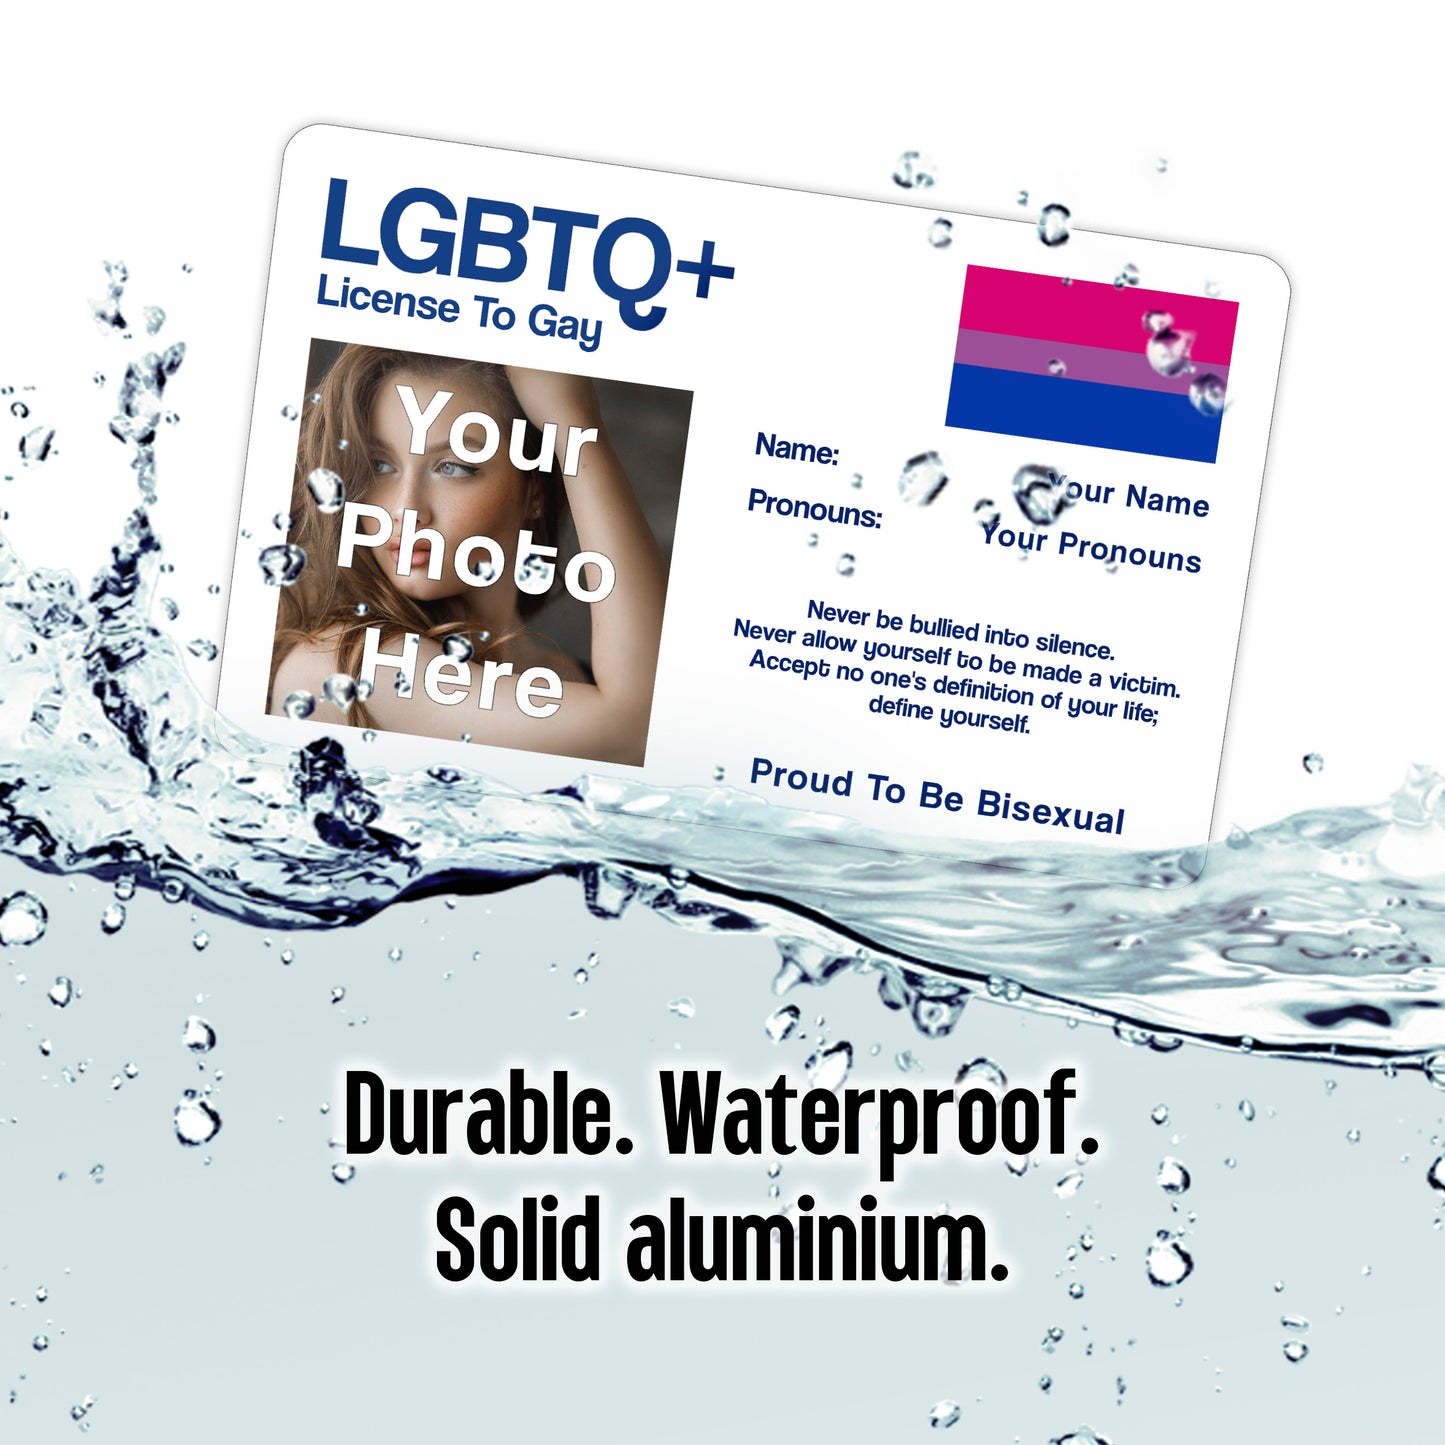 License to Gay personalised aluminium wallet card with your name, pronouns, photo, and the bisexual pride flag